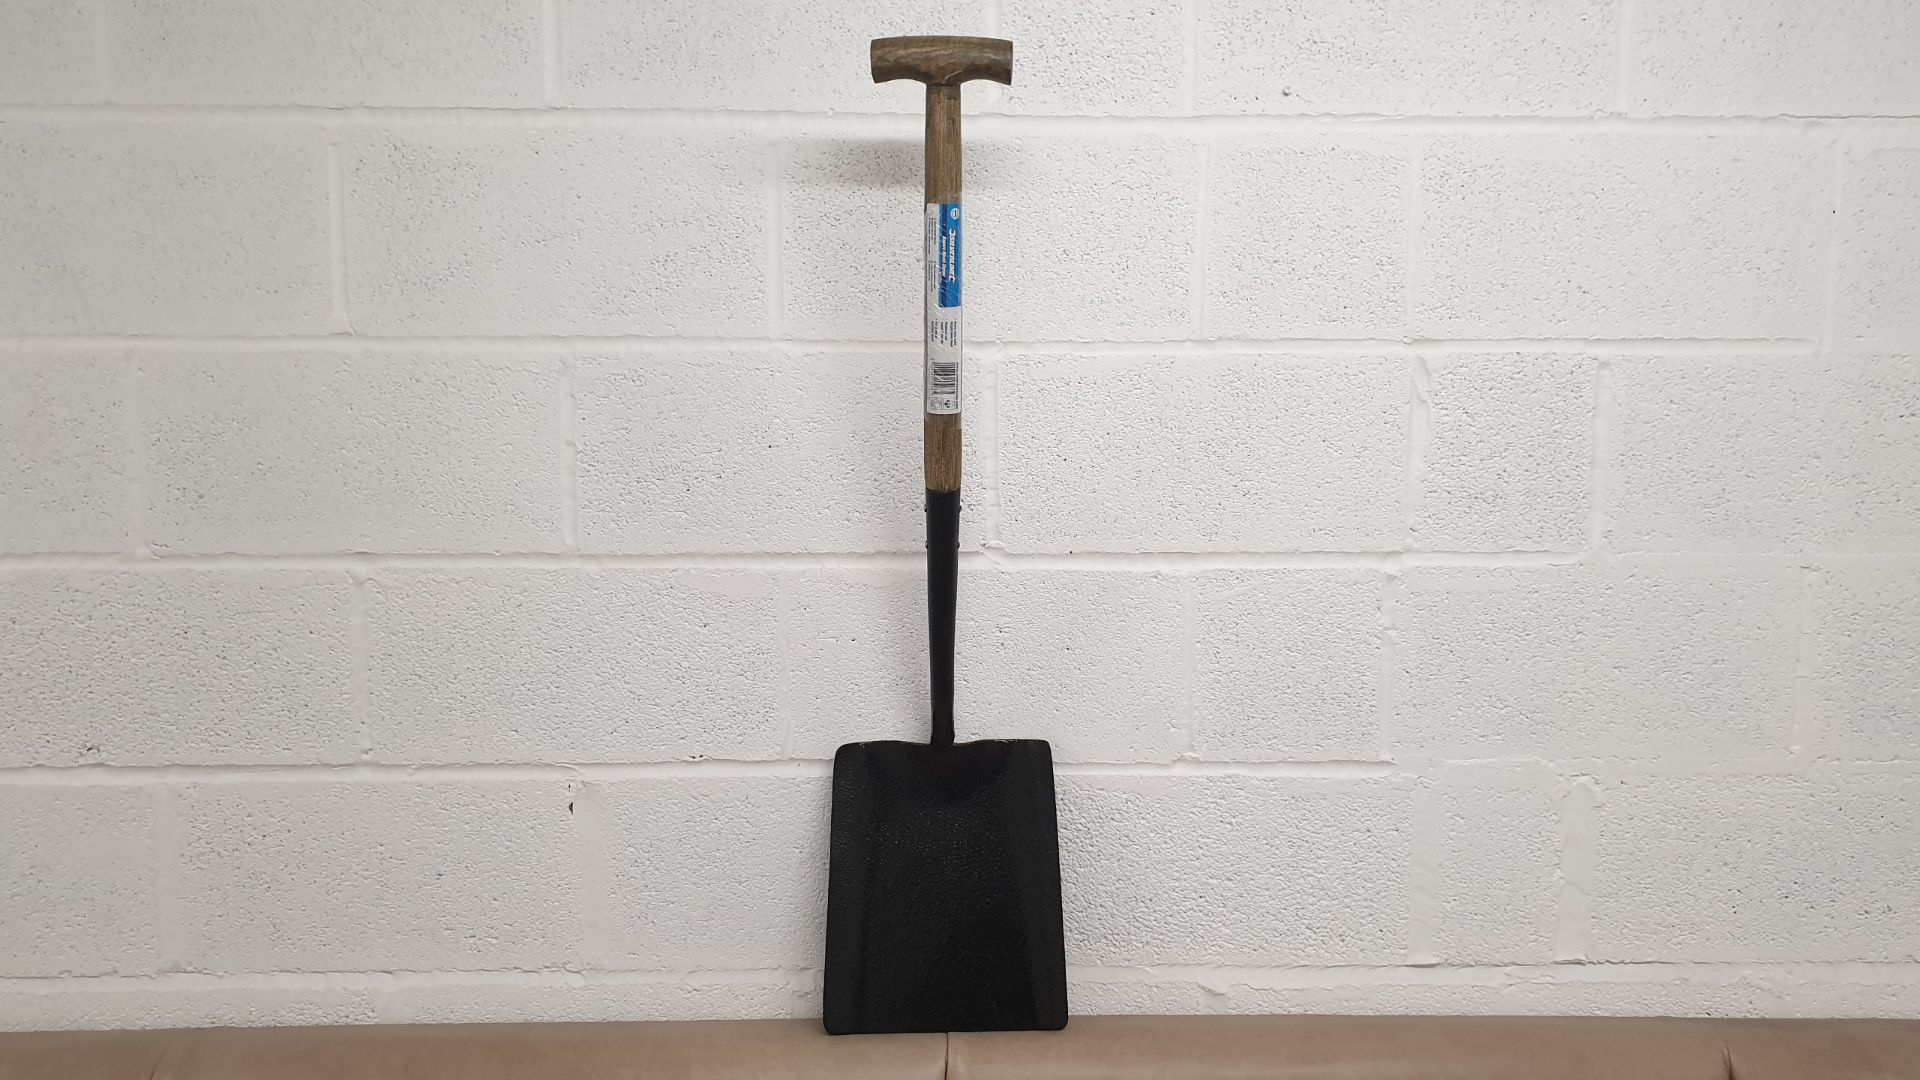 5 X BRAND NEW SILVERLINE SQUARE MOUTH SHOVEL - 1000MM